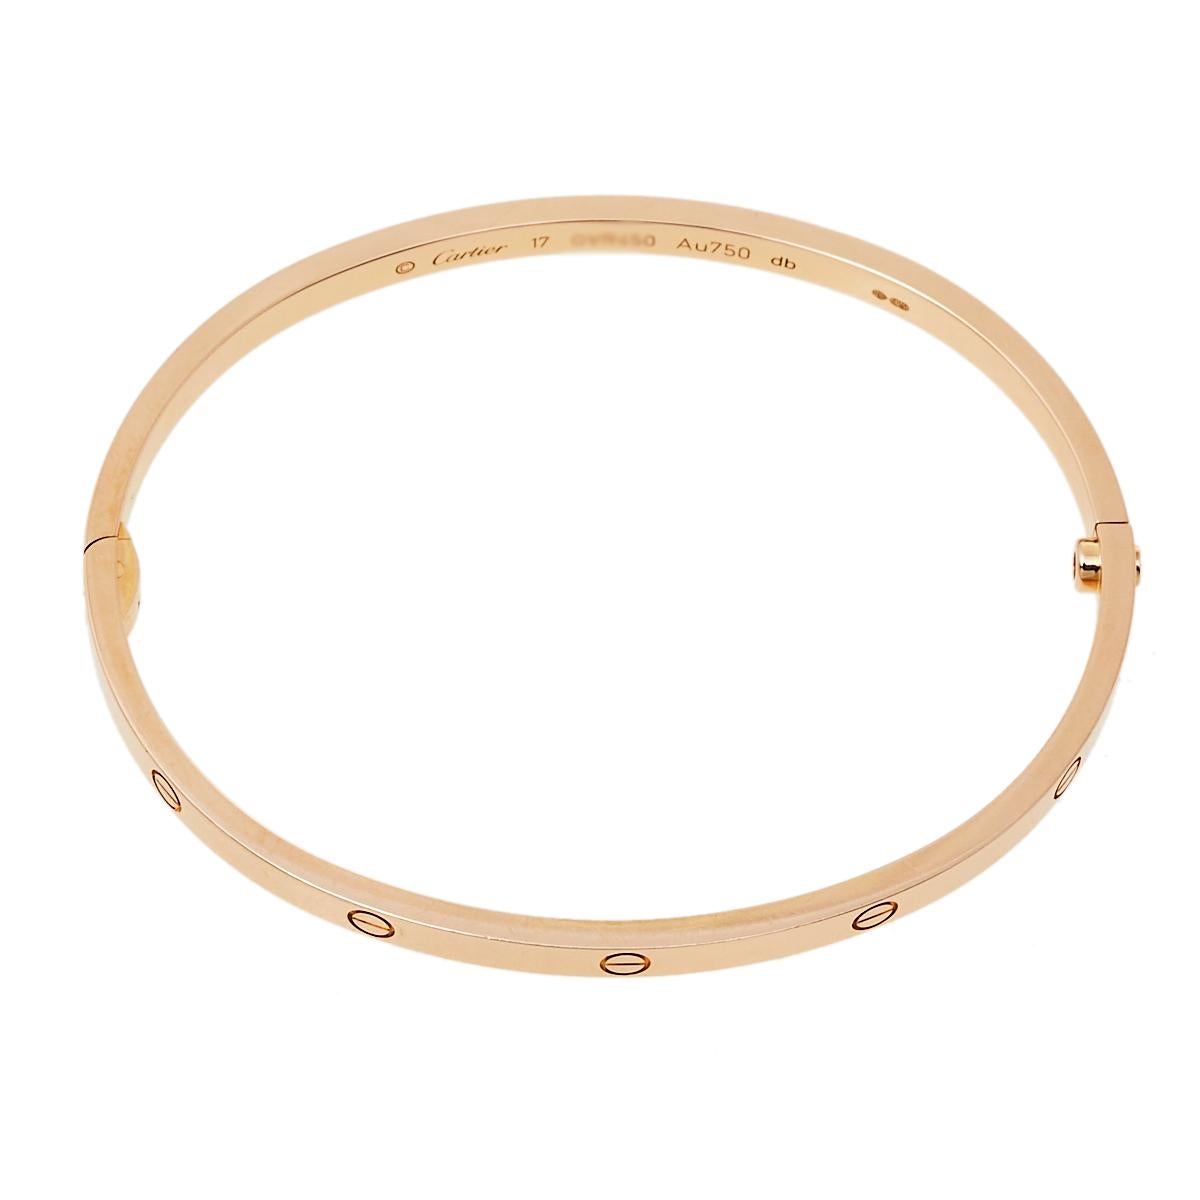 We fell in love with this Cartier Love bracelet at first glance. Look at its gorgeous yet subtle accents and picture how it will beautifully sit on your wrist and charm your peers. The creation is crafted from 18K rose gold and neatly detailed with